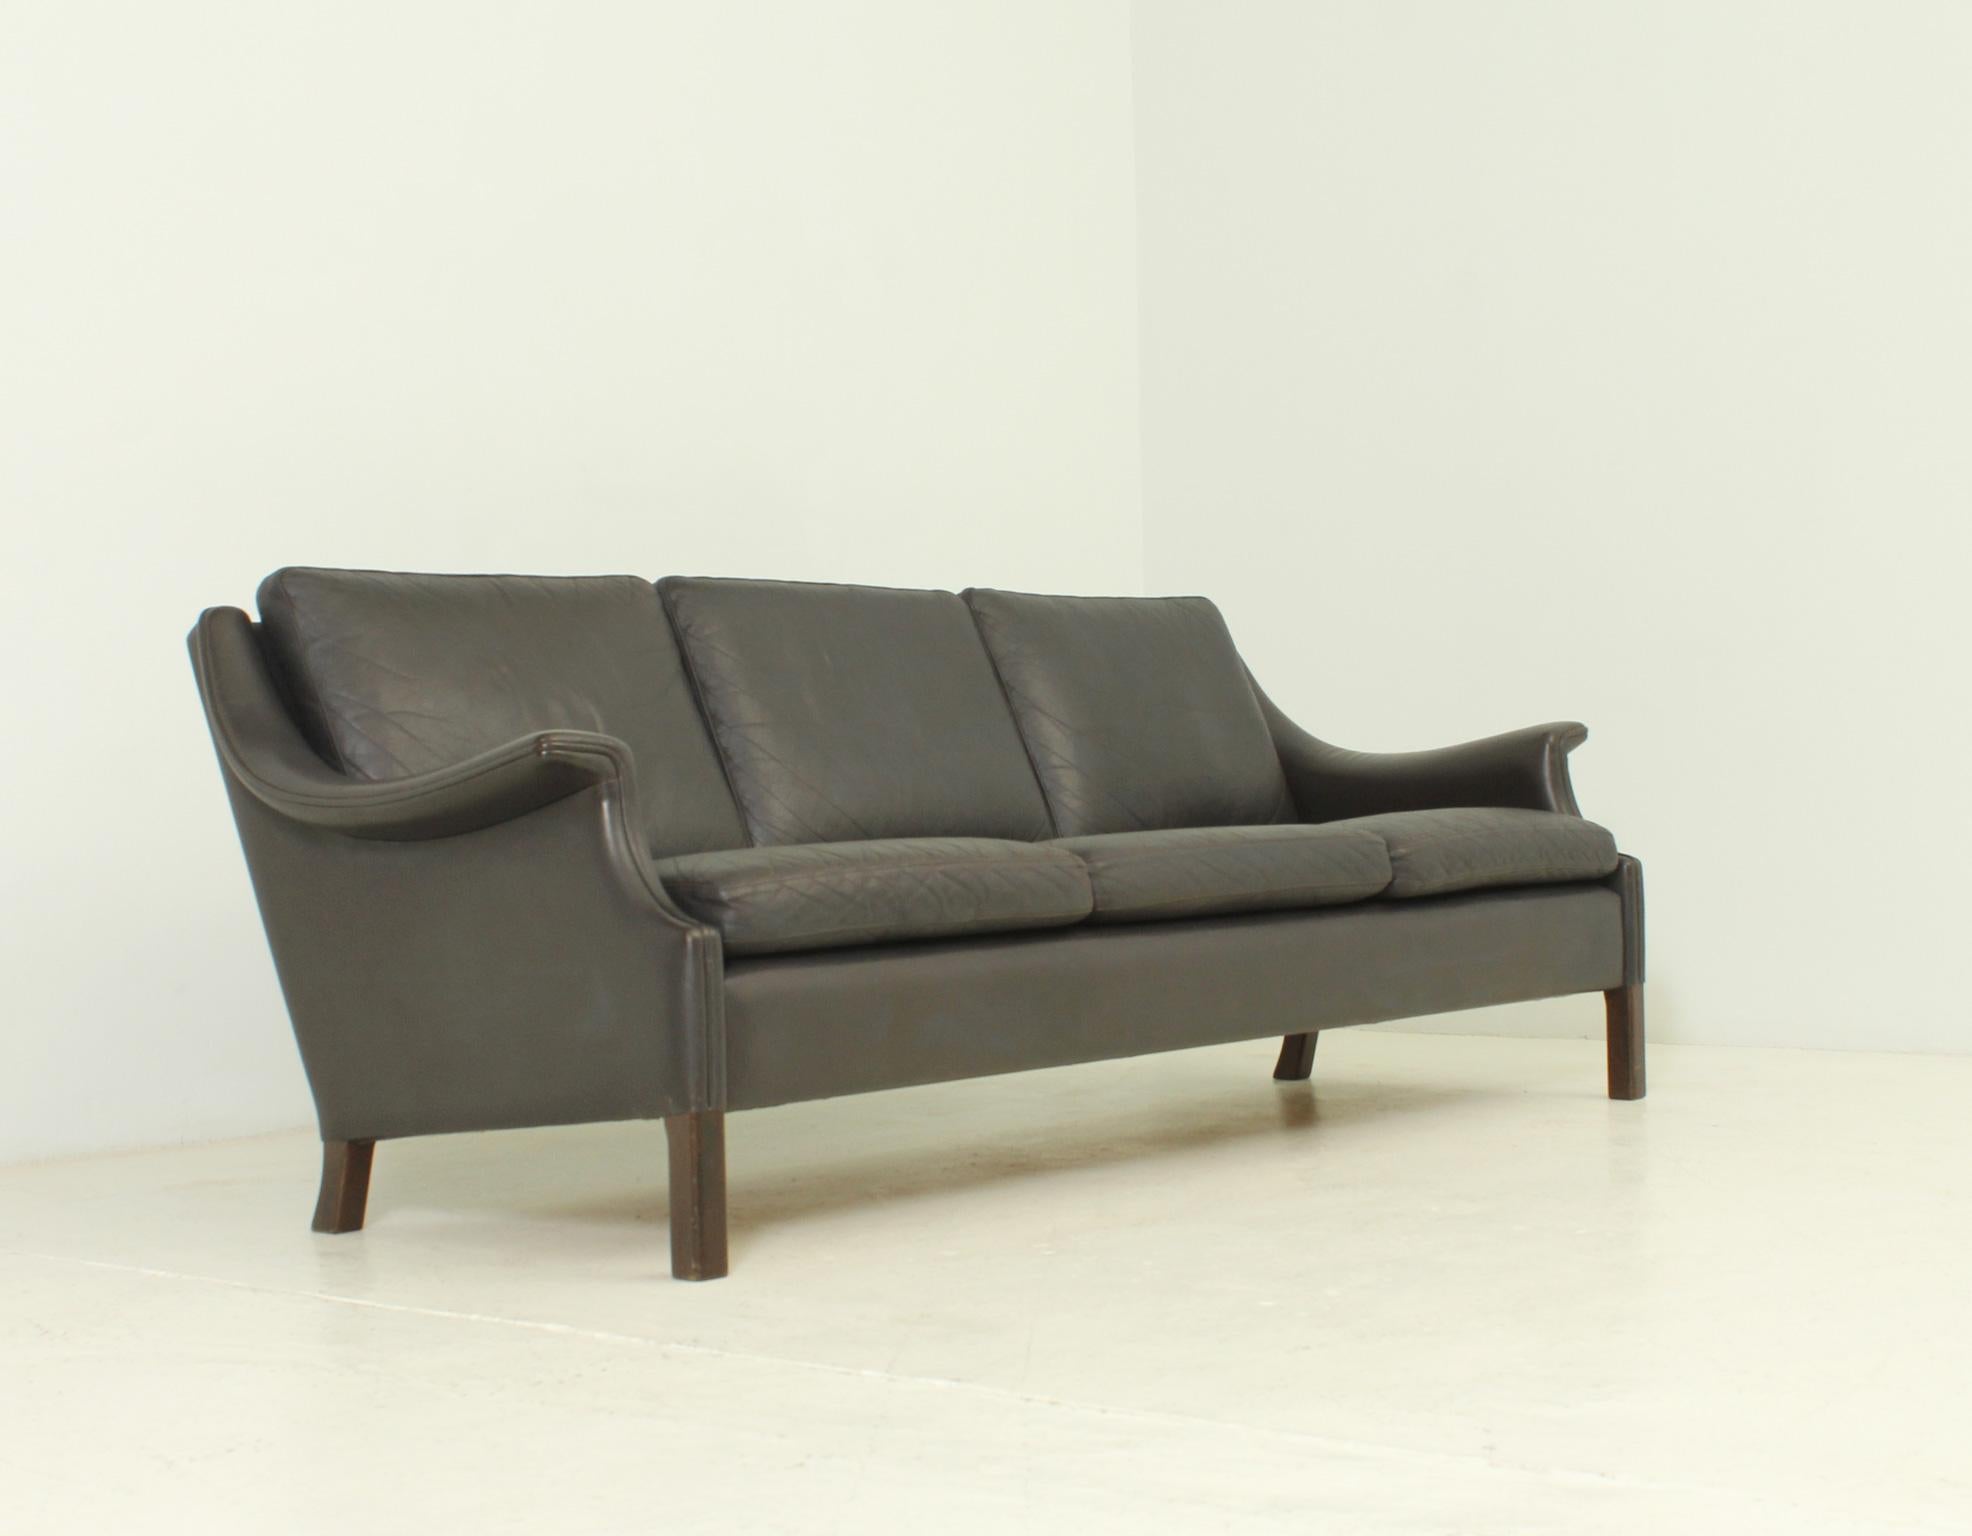 Three-seater danish sofa from 1960's designed by Aage Christiansen for Erhardsen & Andersen. Dark brown leather and wooden frame with loose cushions.